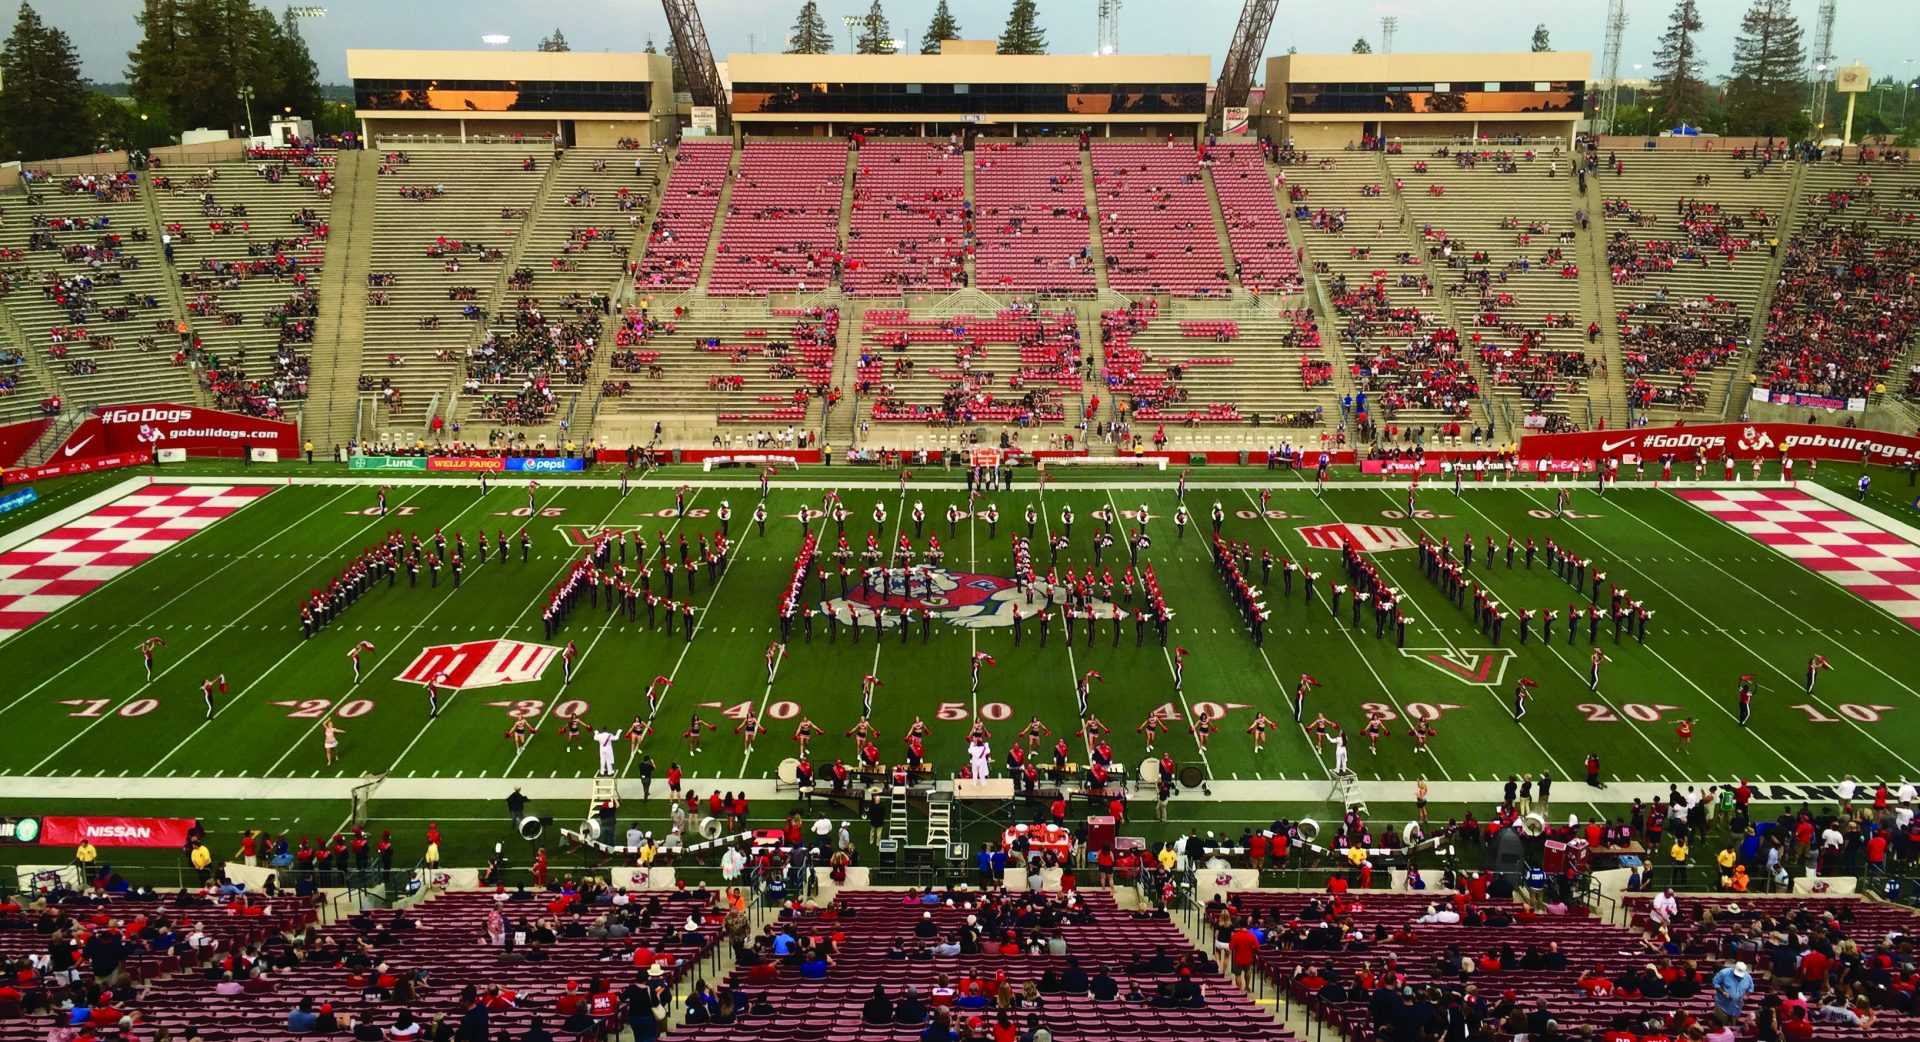 The+Fresno+State+Marching+Band+spells+out+%E2%80%9CFresno%E2%80%9D+during+the+pregame+performance+on+Saturday%2C+Sept.+10%2C+2016.+%28Jenna+Wilson%2FThe+Collegian%29